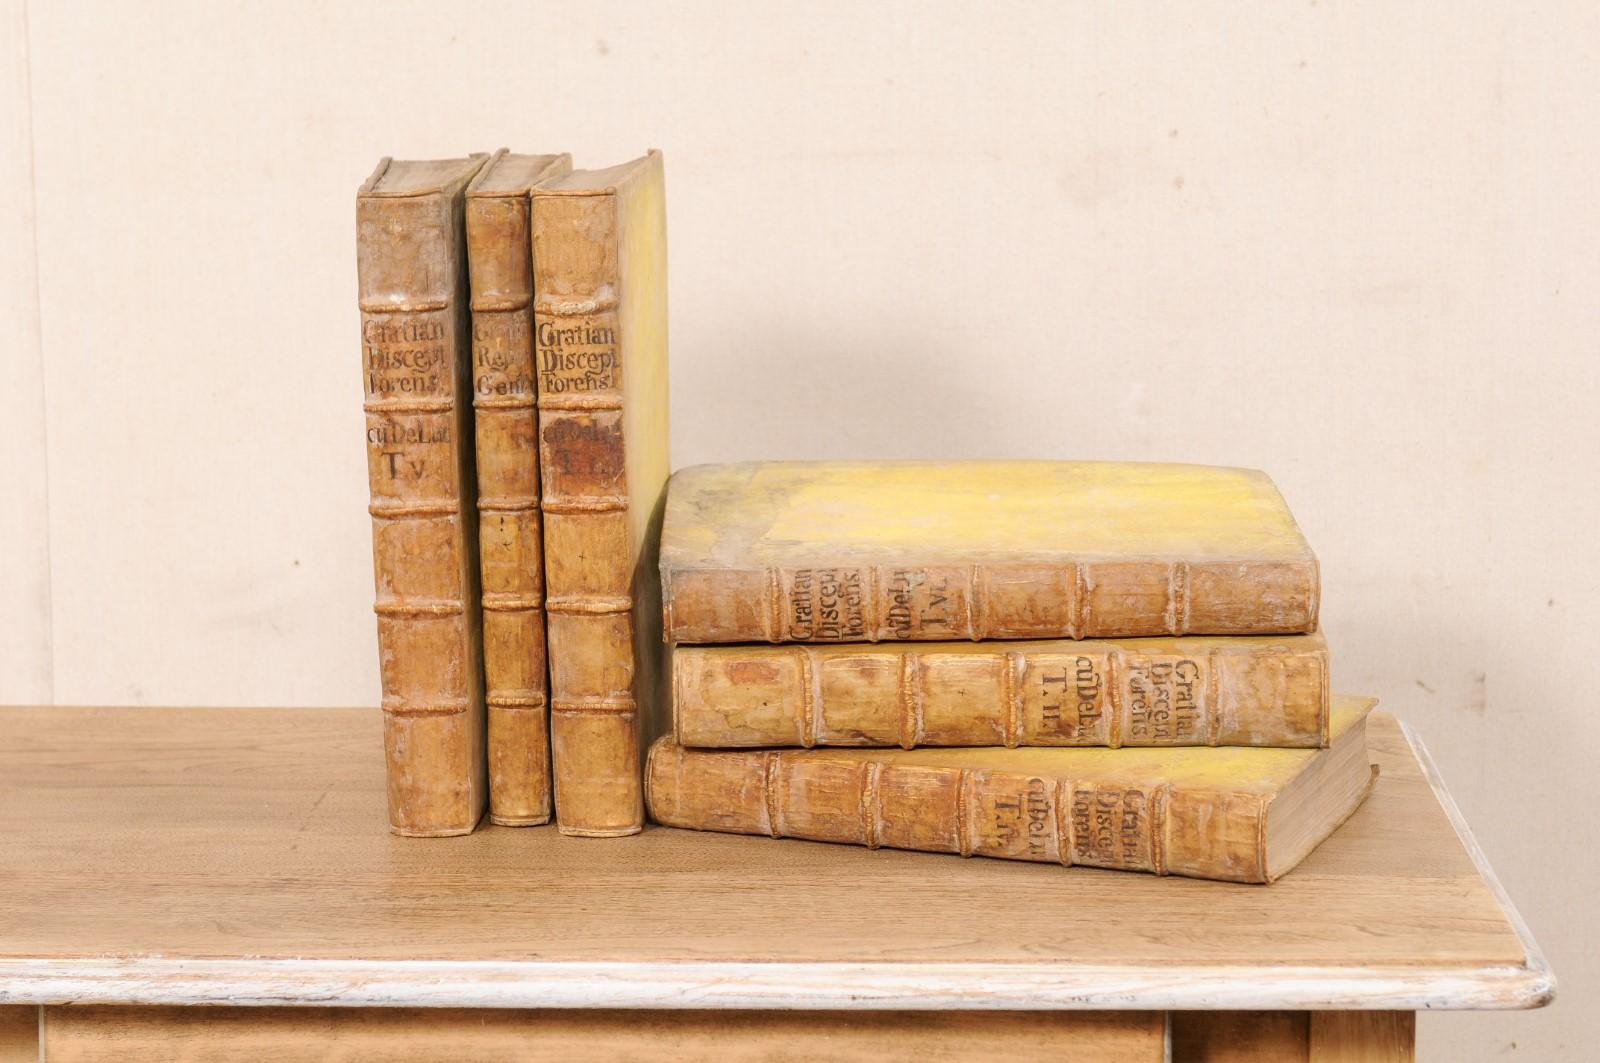 A handsome collection of 6 Austrian vellum bound books from the late 17th century. This antique set of six books from Austria, which retain their original vellum bindings, have Latin writing and will make fabulous decorative objects. Should you